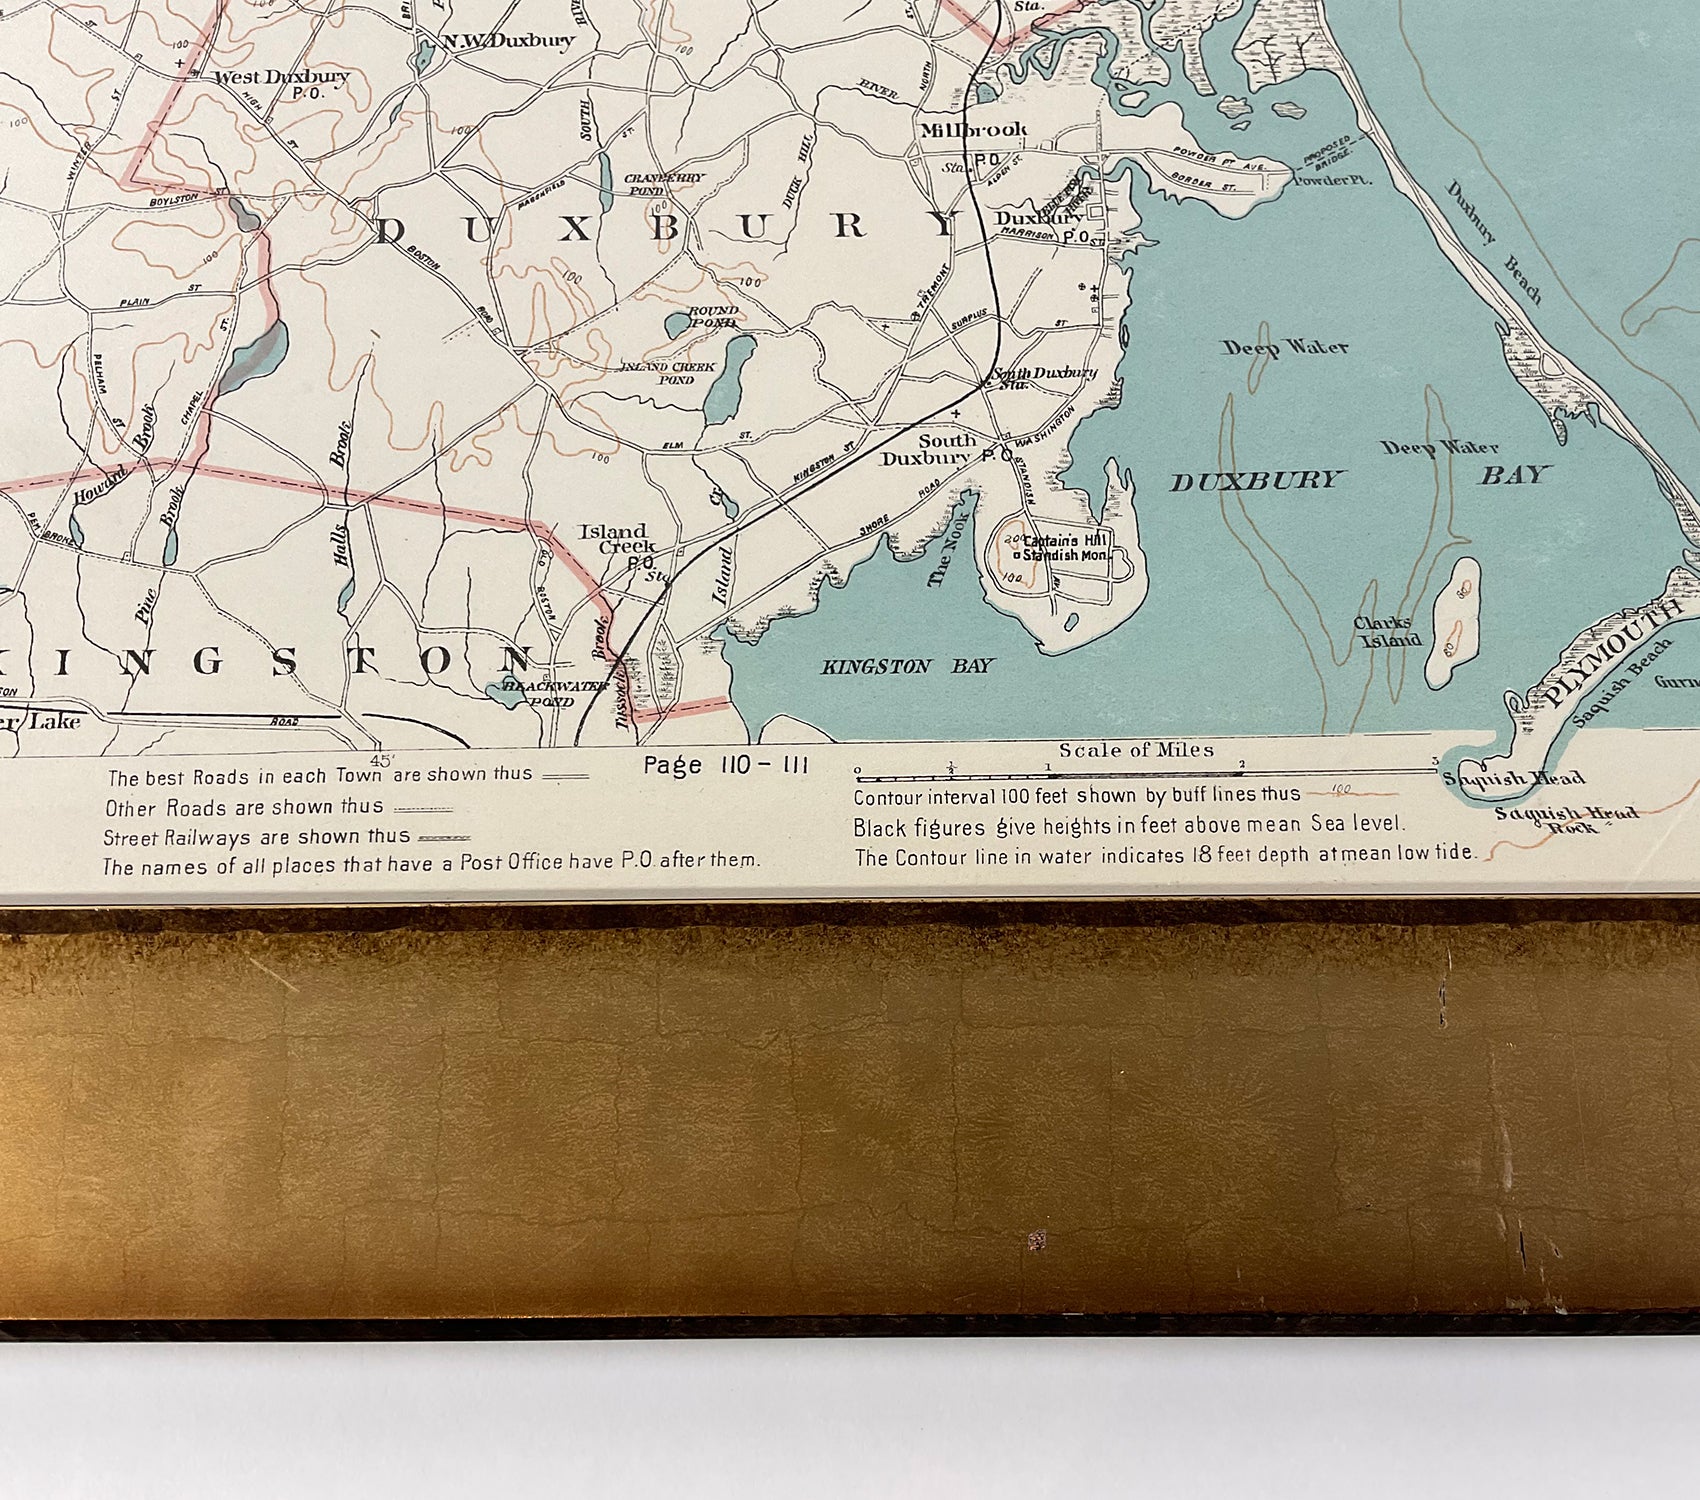 1891 Map Of South Shore Of Boston - Lannan Gallery